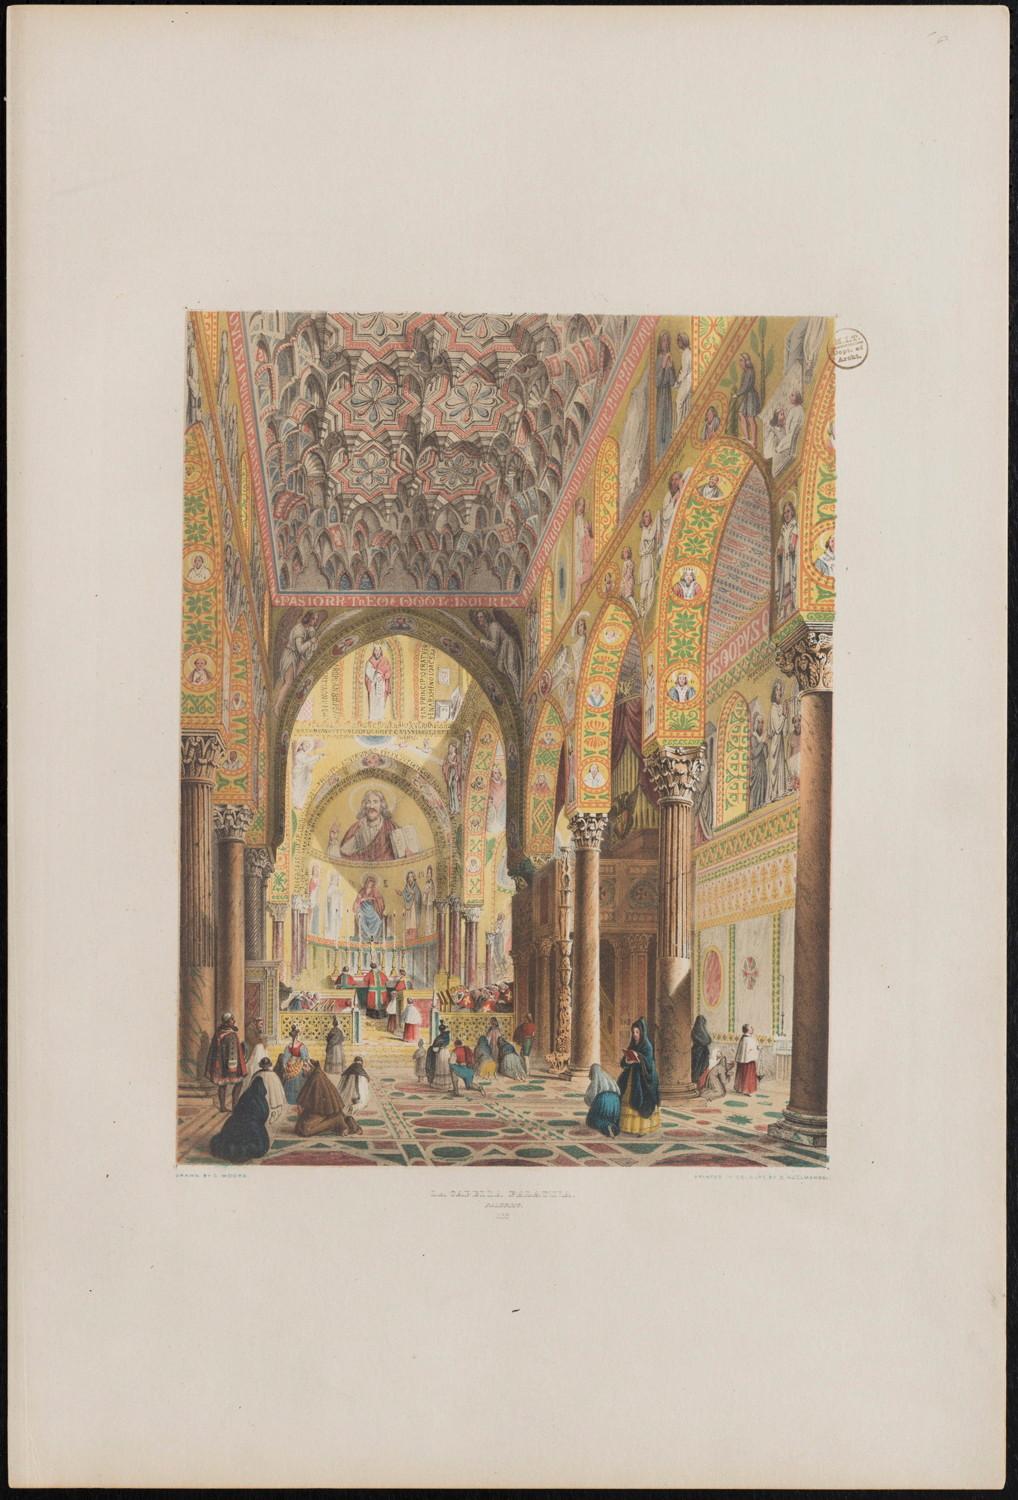 Lithograph of the chapel interior